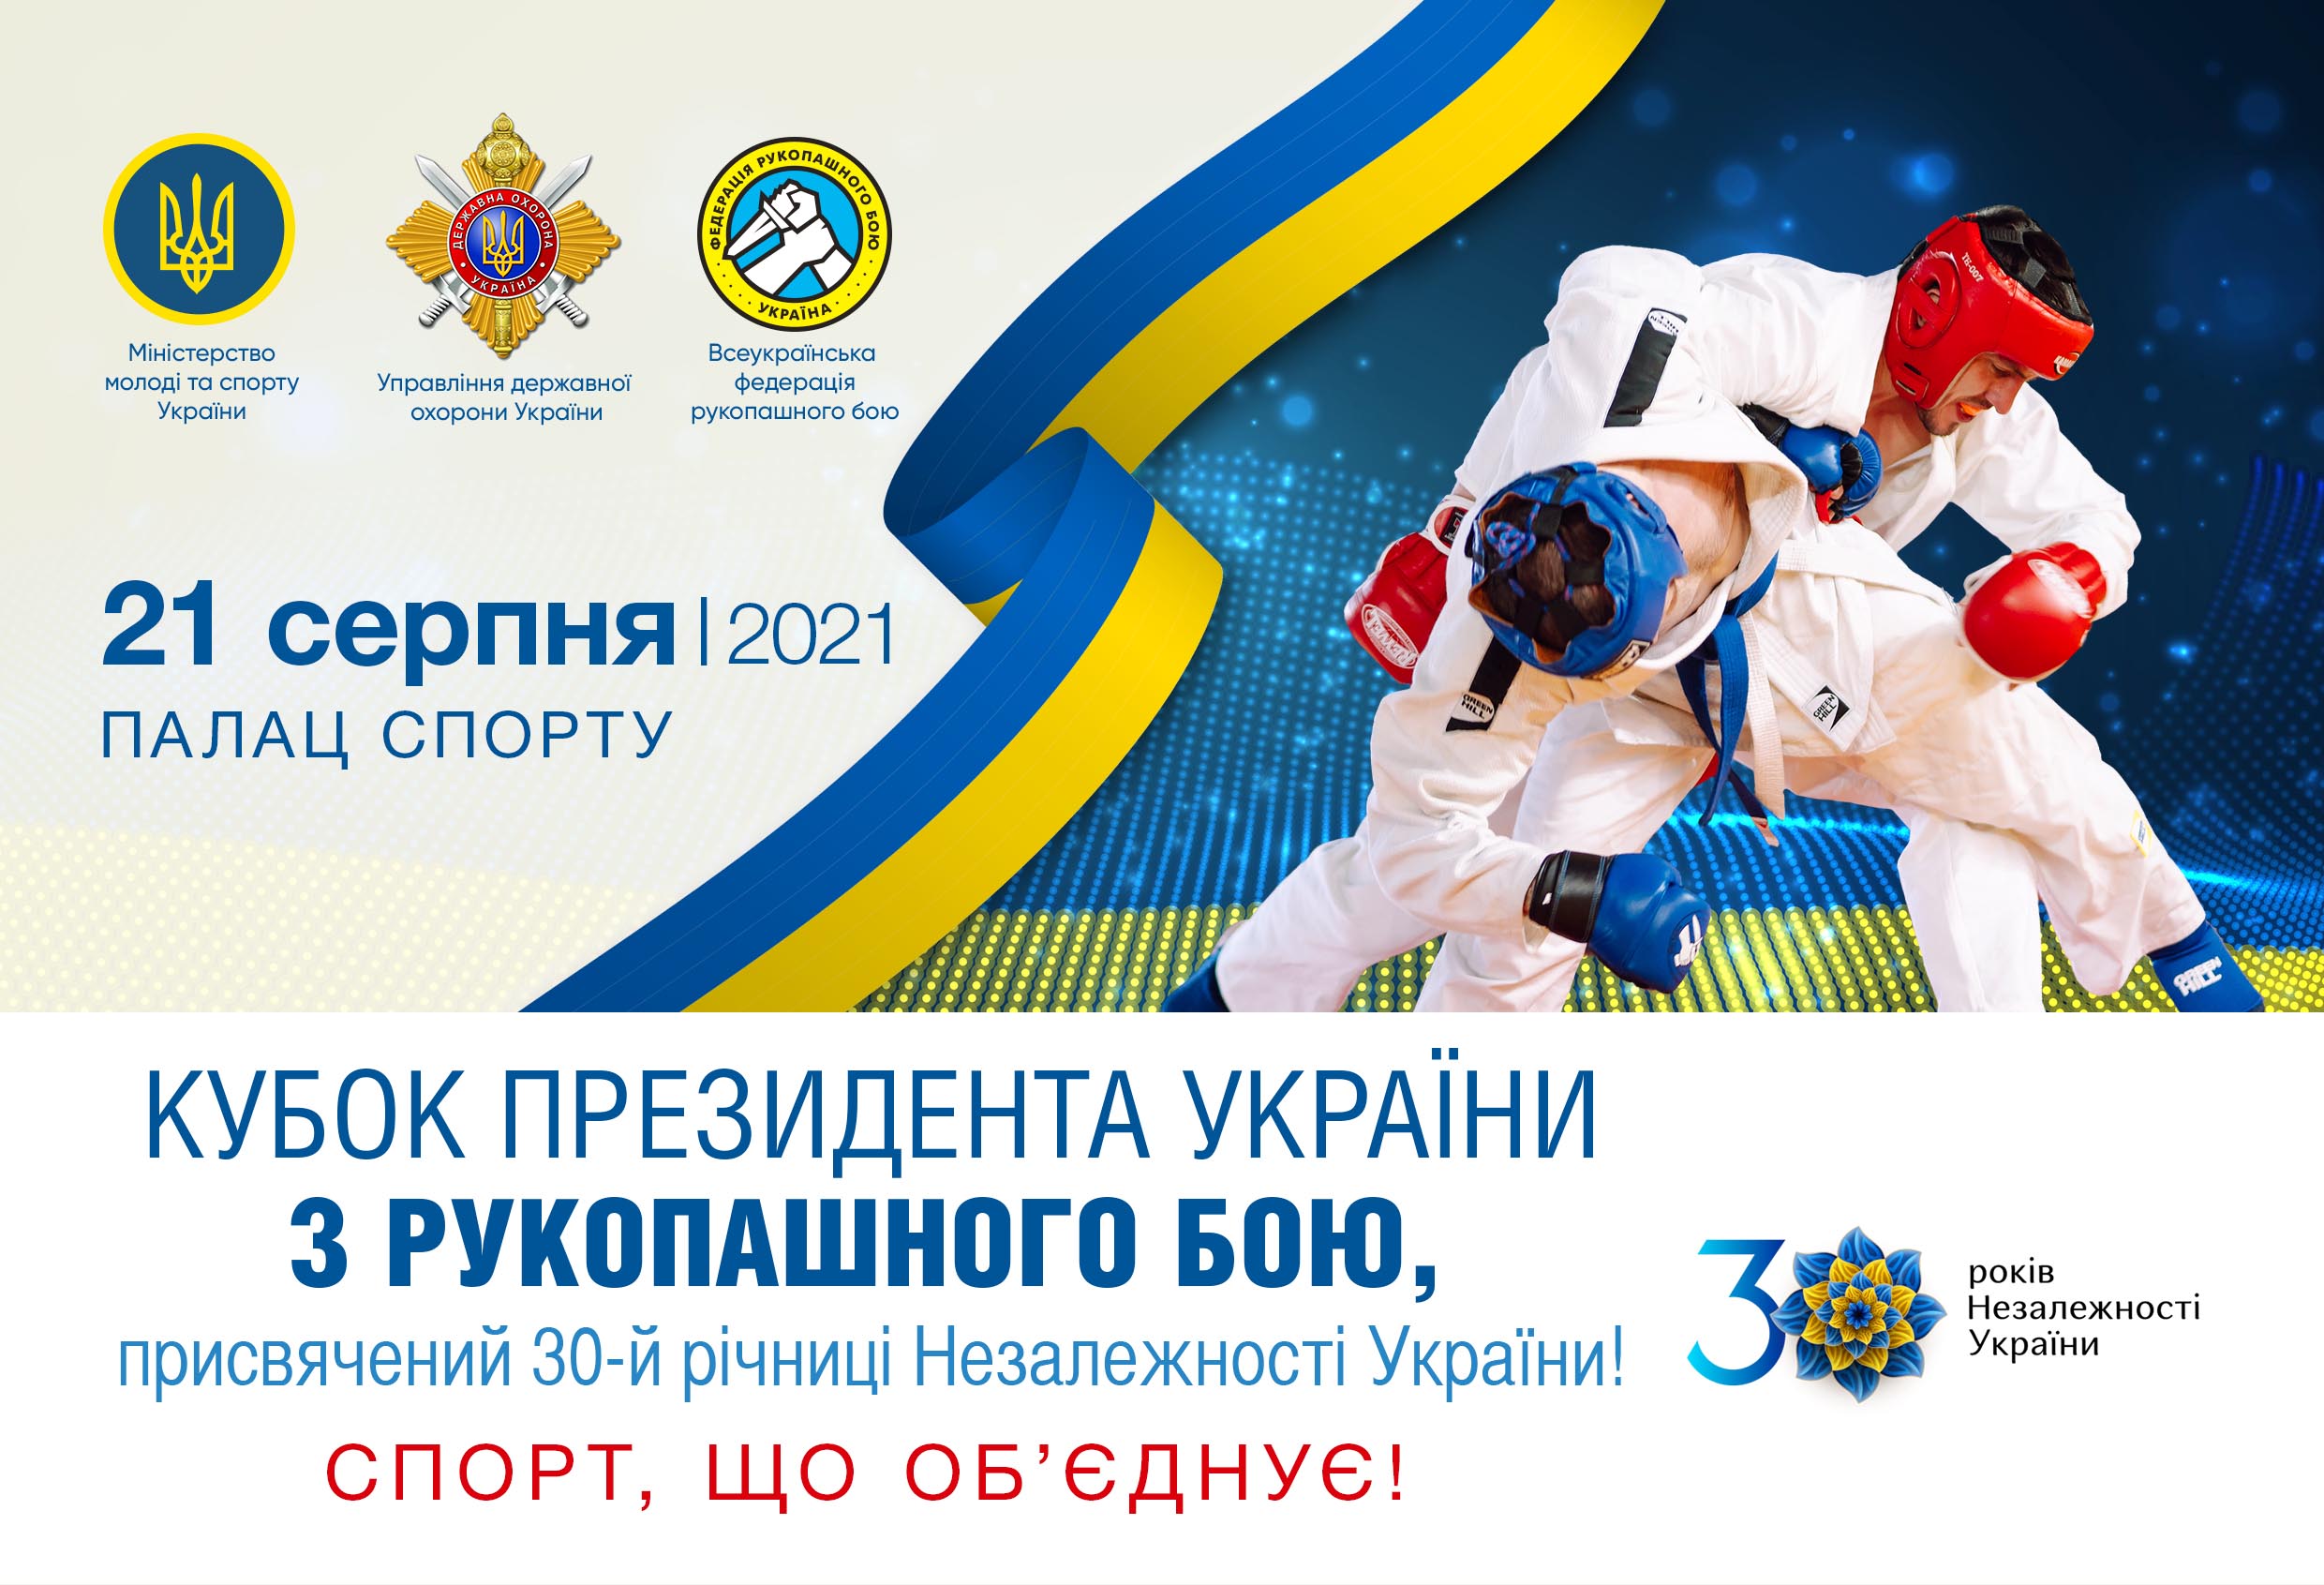 The Cup of the President of Ukraine in hand-to-hand fighting will take place in the Palace of Sports